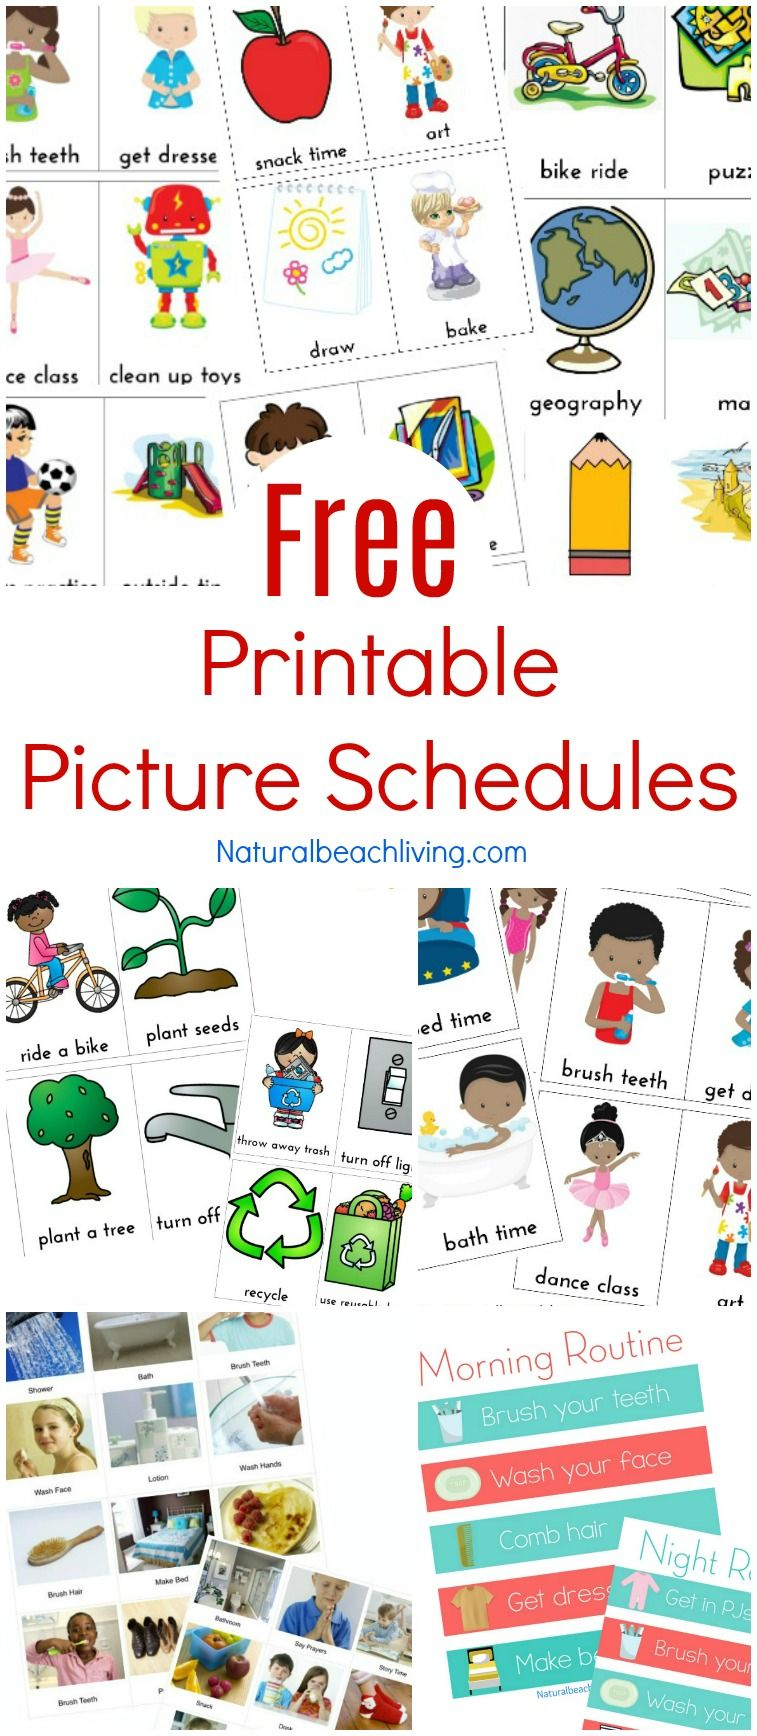 Free Printable Picture Schedule Cards - Visual Schedule Printables - Free Printable Schedule Cards